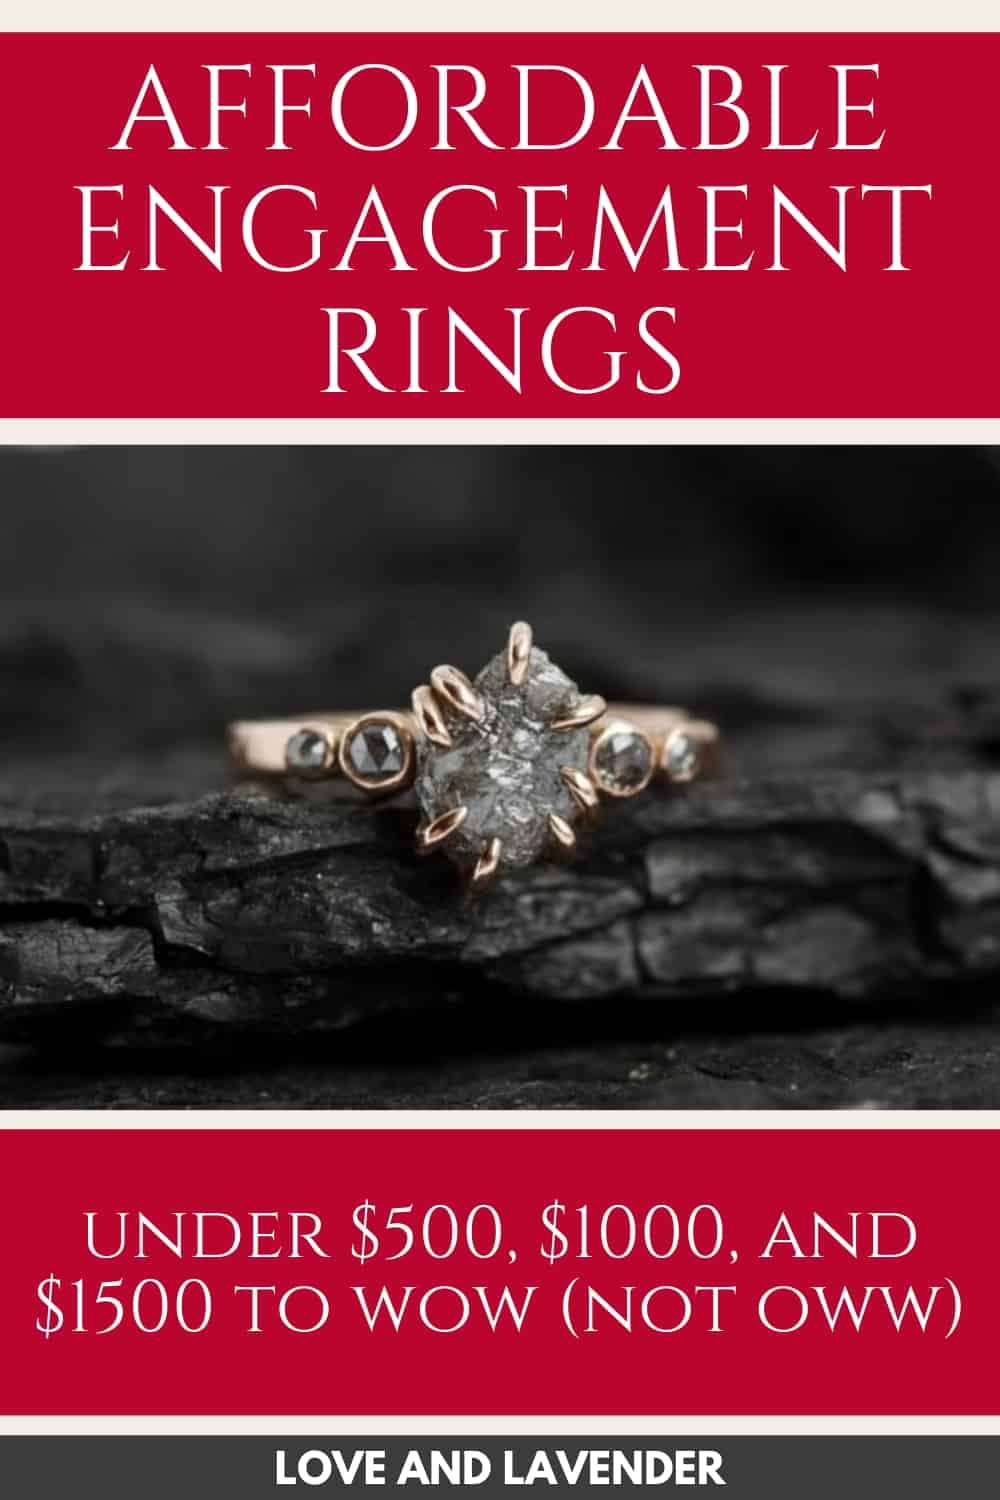 pinterest pin - affordable engagement rings